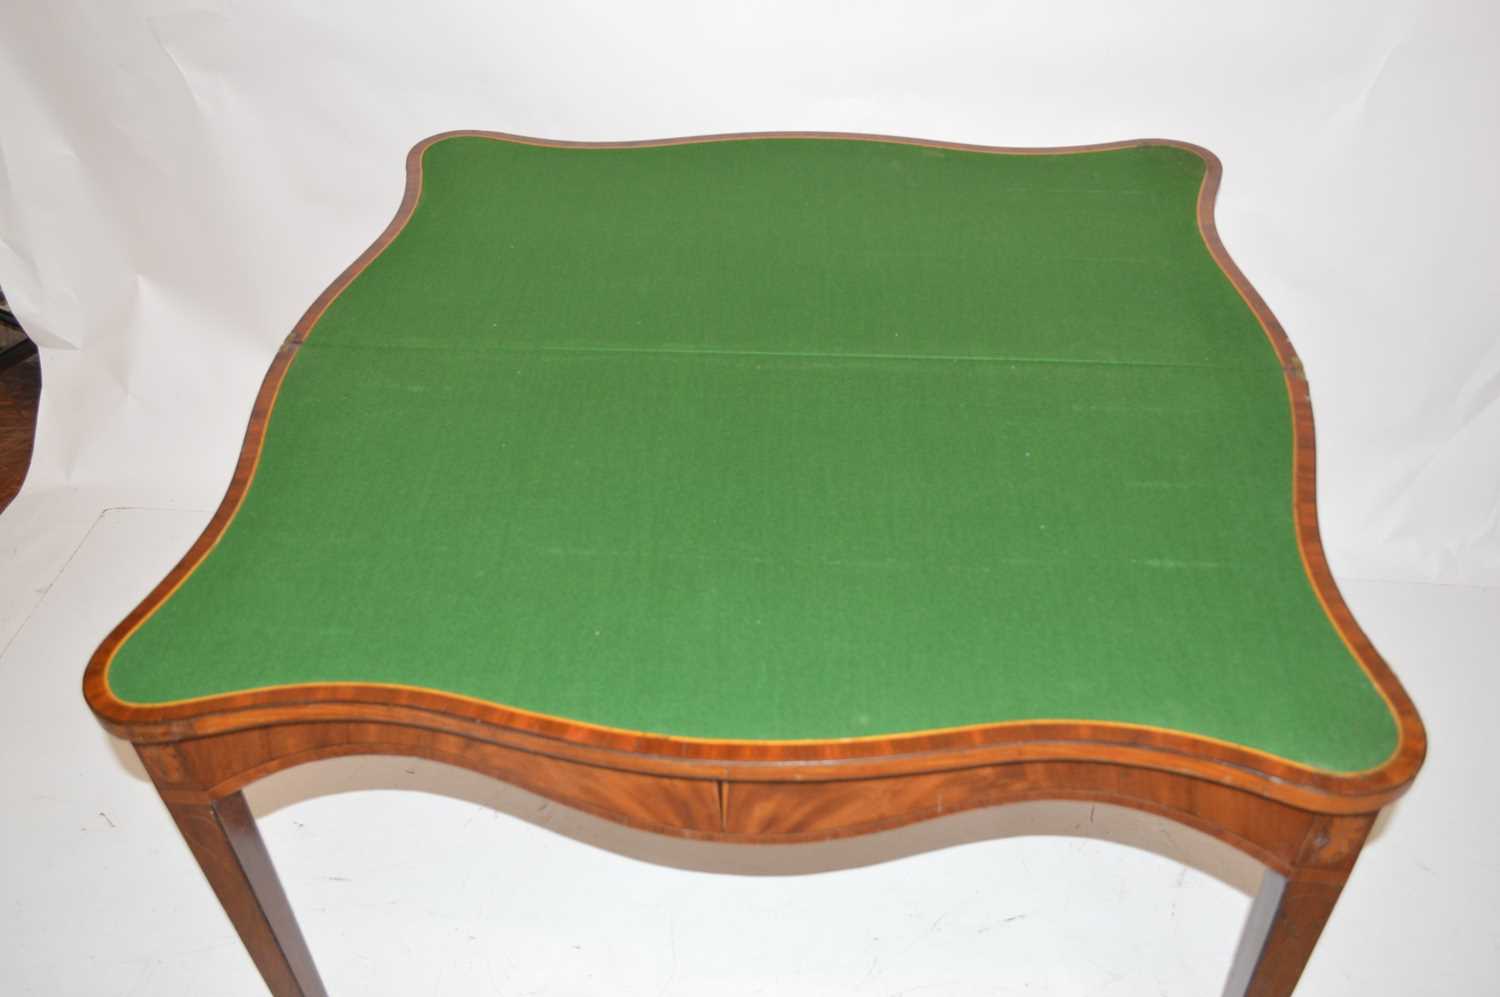 Early 19th-century fold-over card table - Image 3 of 8